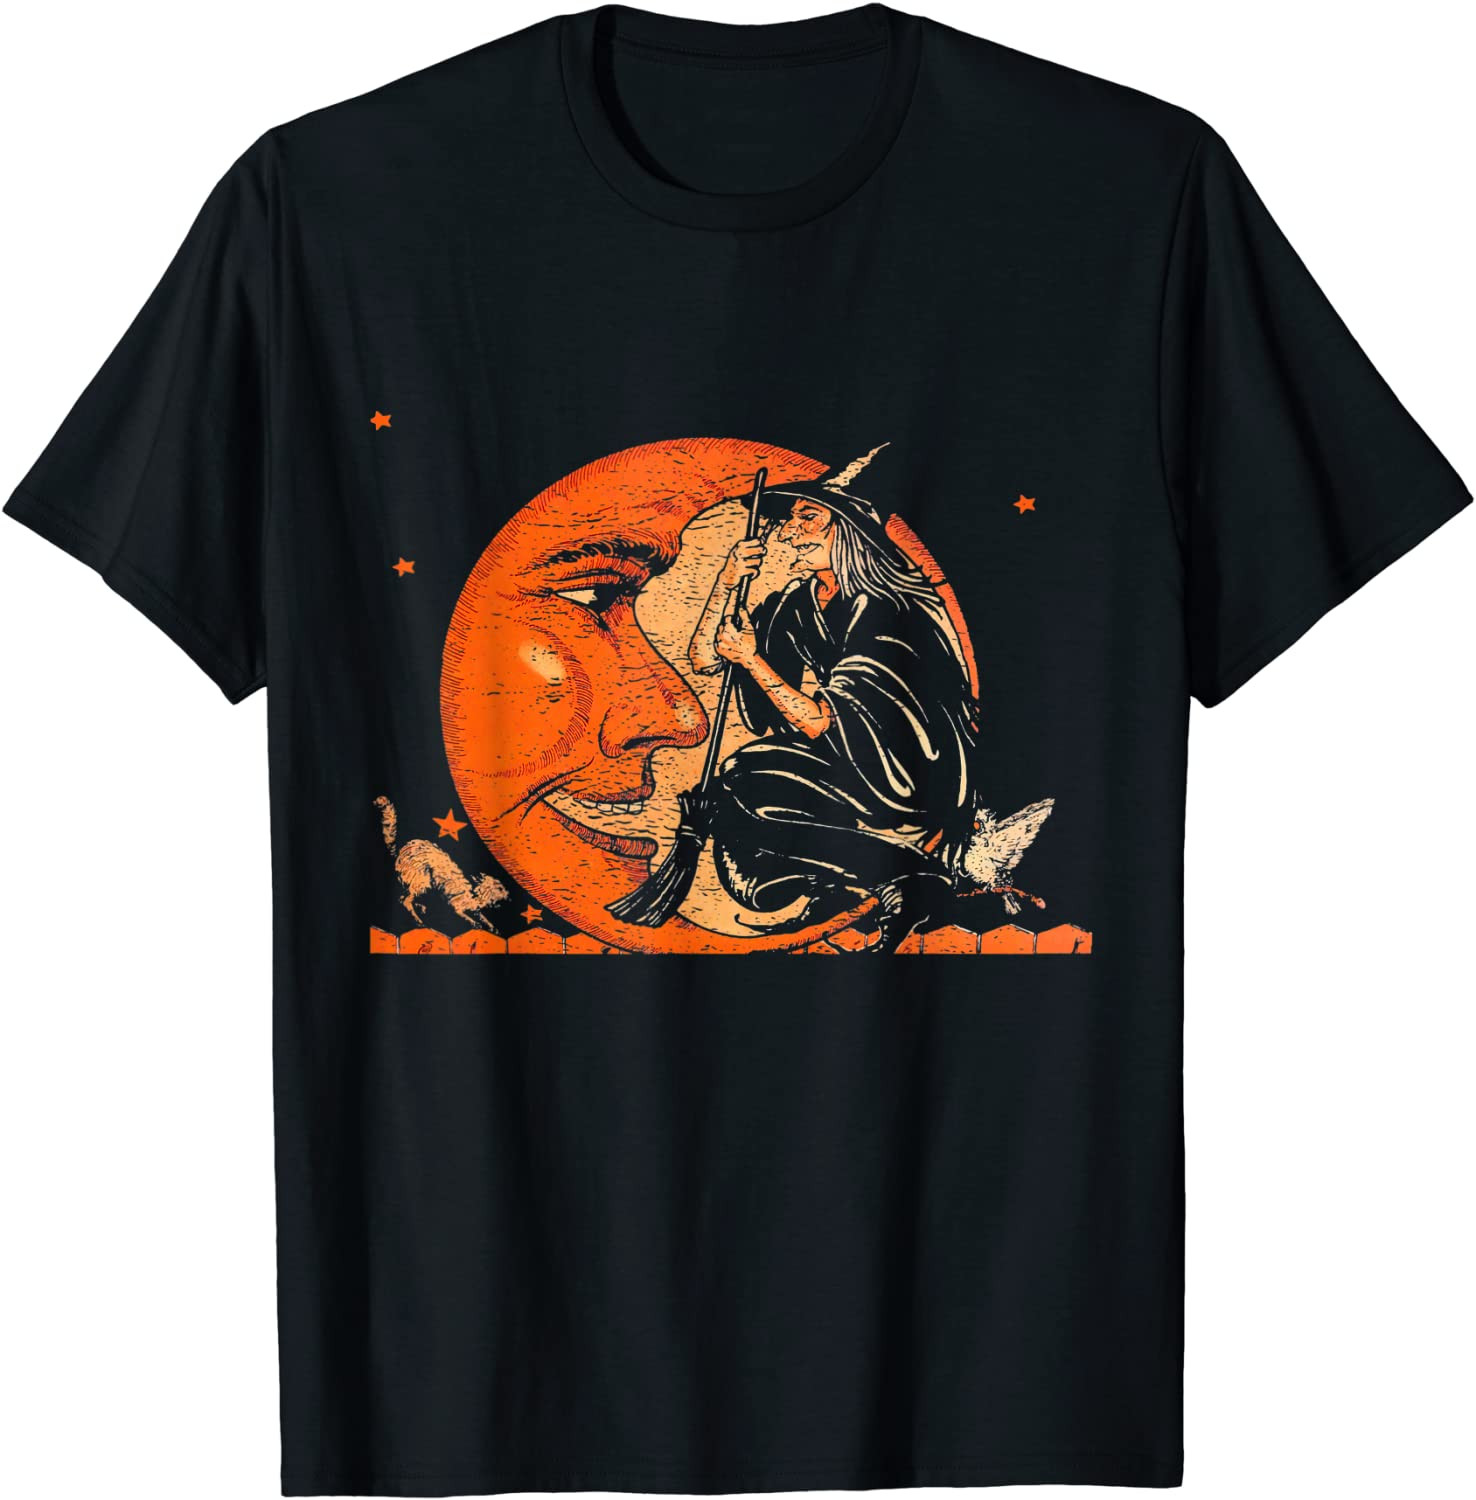 Great Vintage Witch And Moon Halloween Design T-Shirt